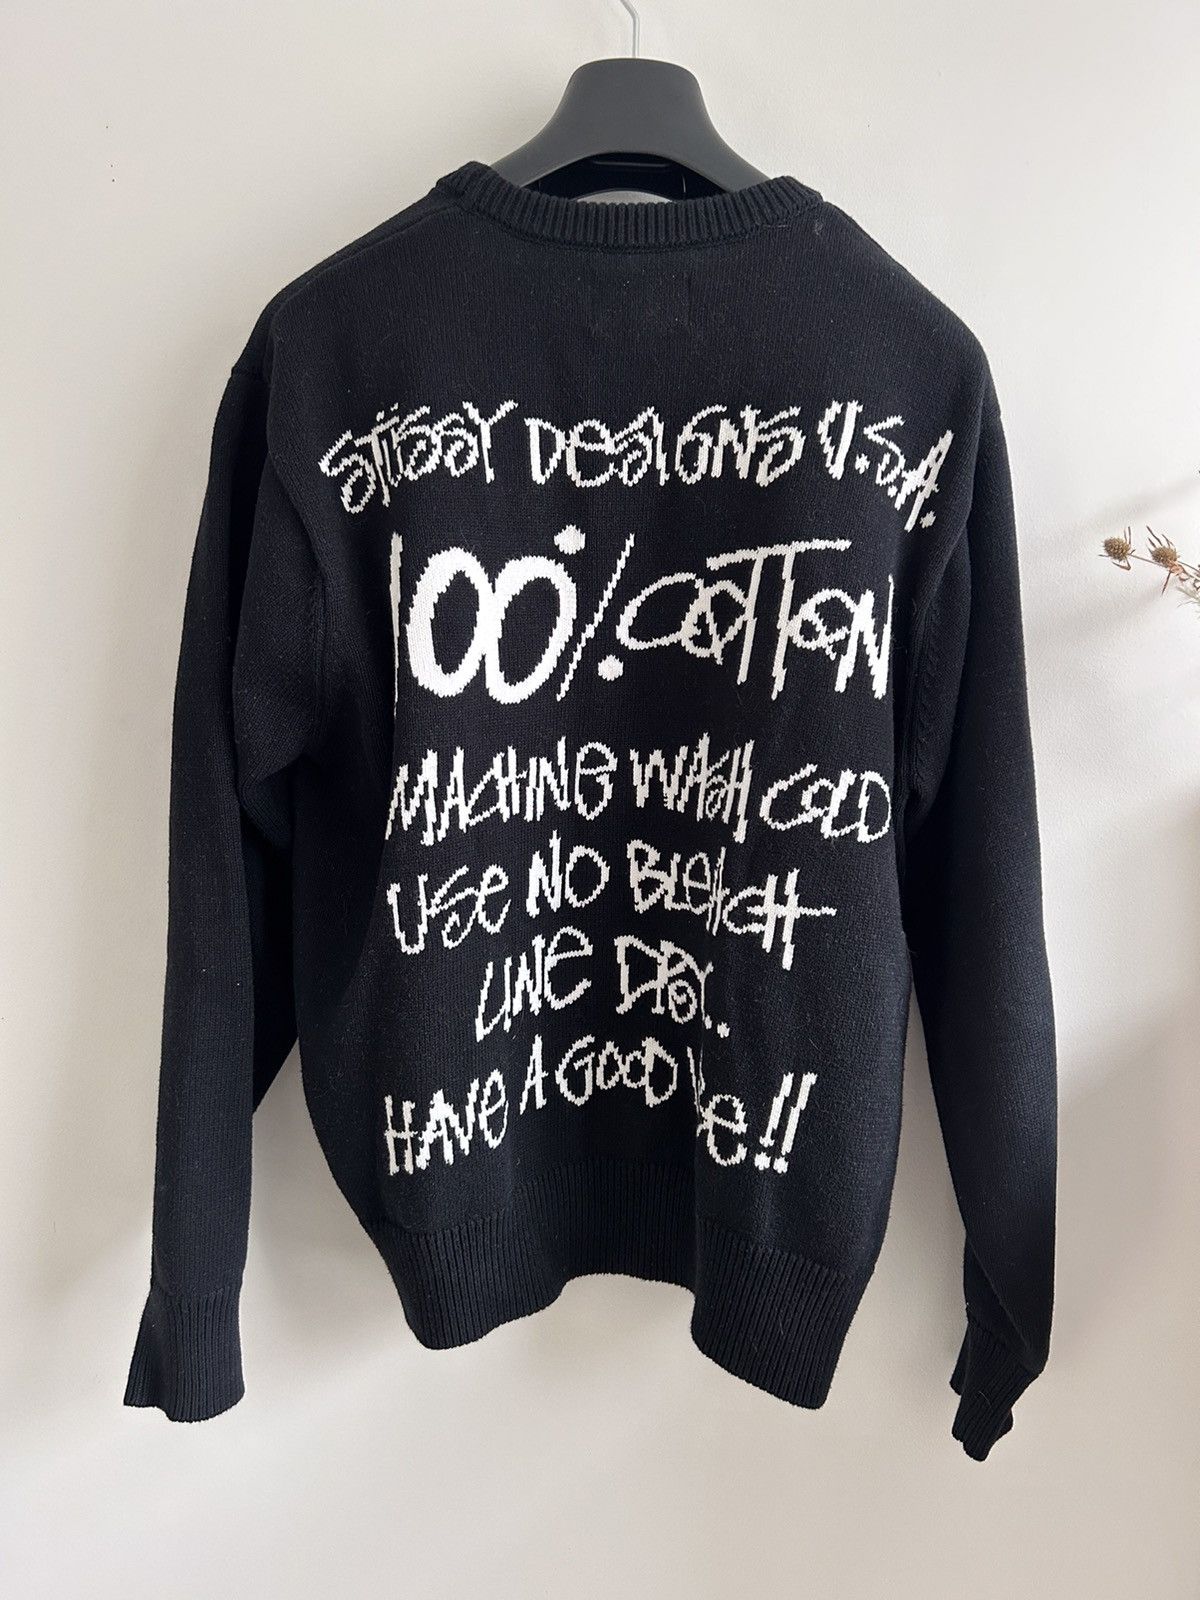 Stussy Care Label Sweater | Grailed